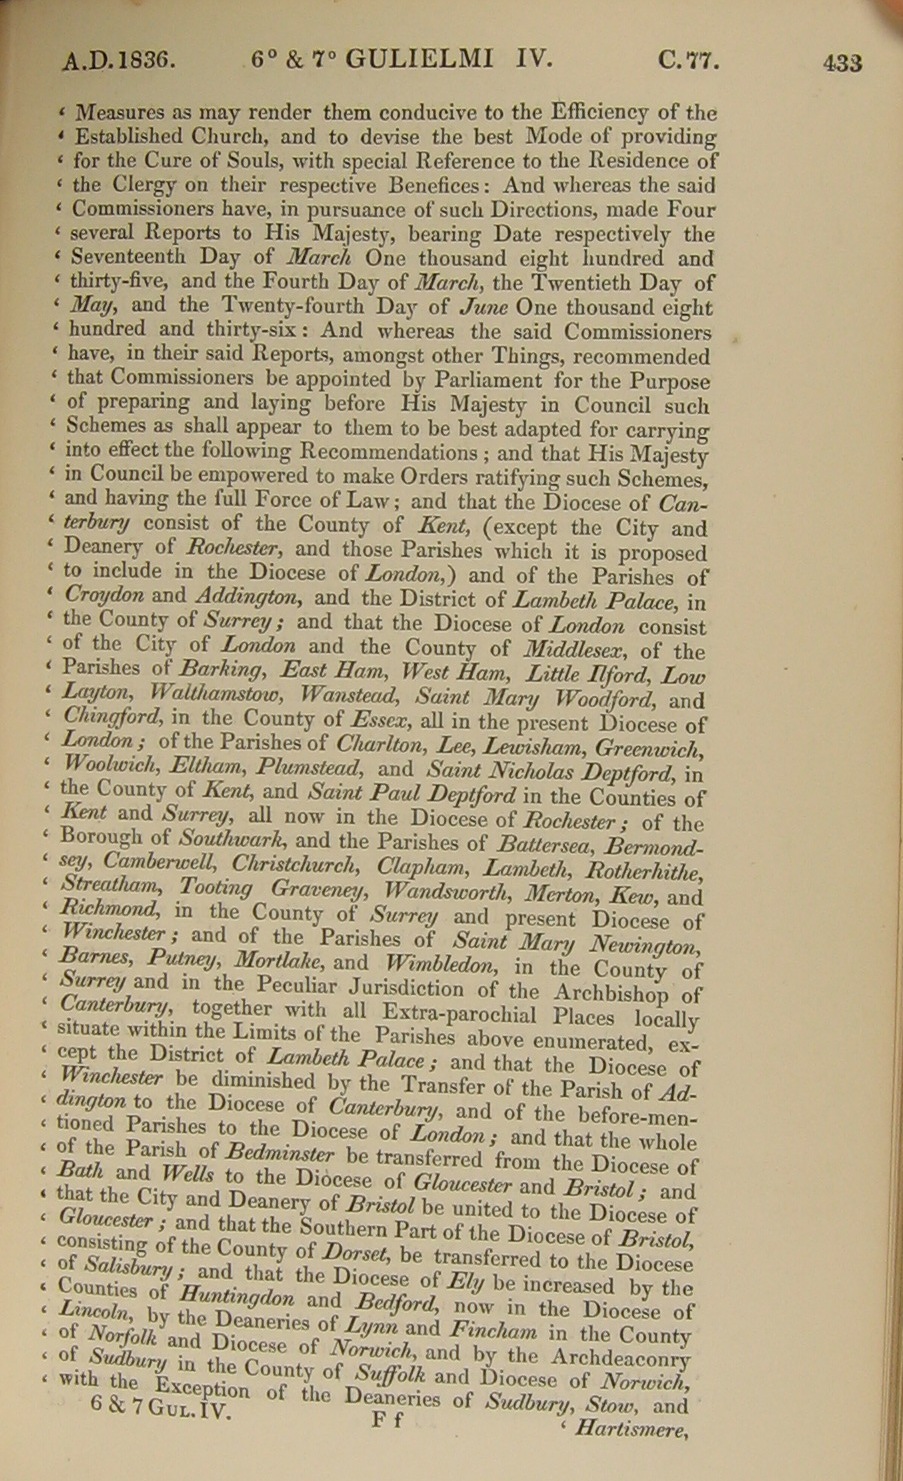 Image of 6 & 7 William IV, c. 77 (page 2 of 12). Click for larger image.